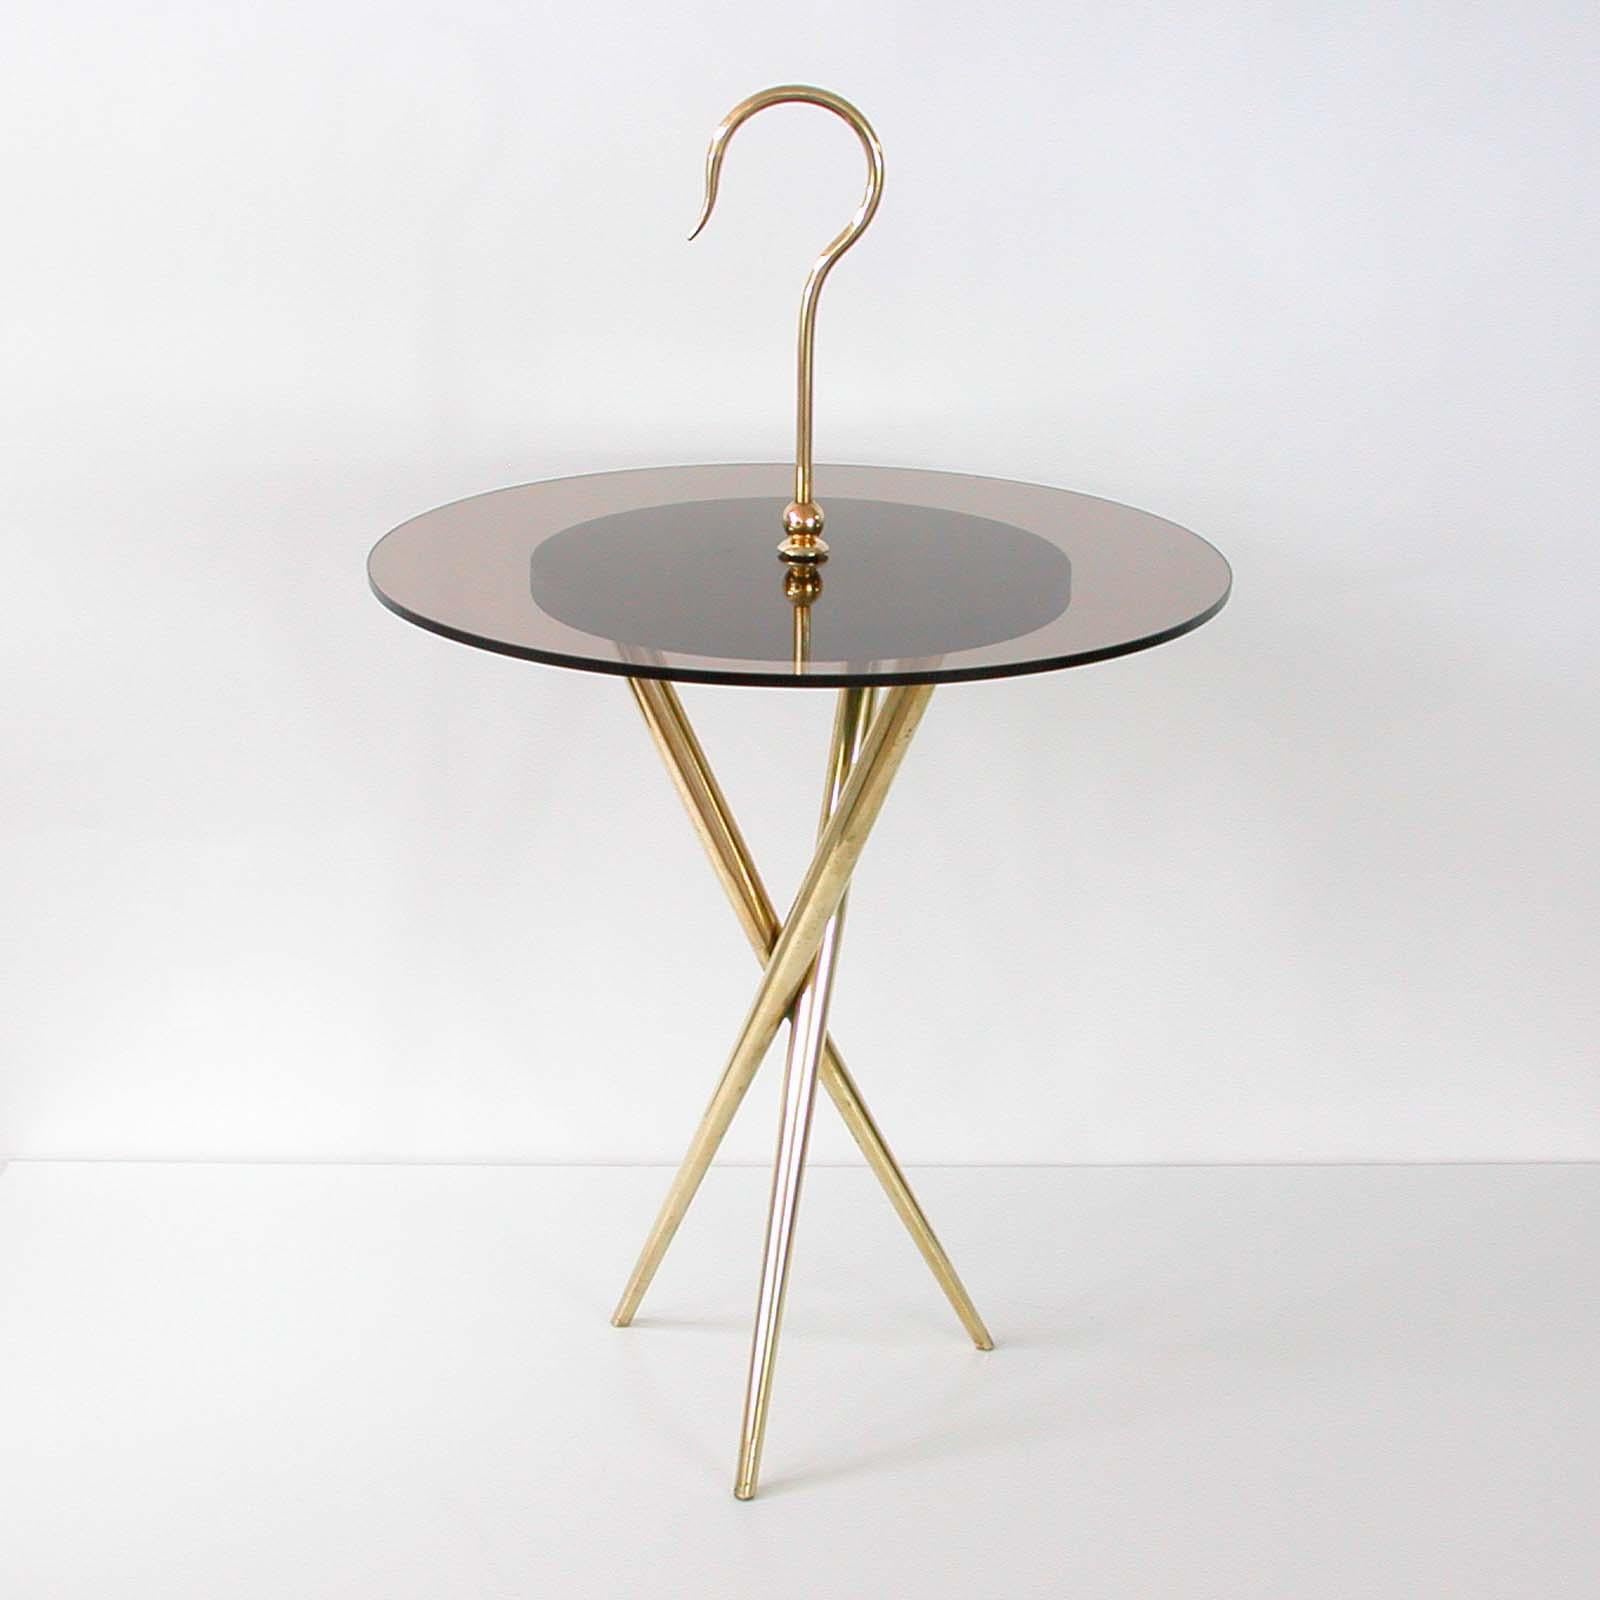 This round tripod occasional table was made in Italy in the 1950s in the manner of Ico Parisi. It has got a brass base, a bronze tinted (smoked) glass tabletop and brass handle and details. Total height with handle is 26